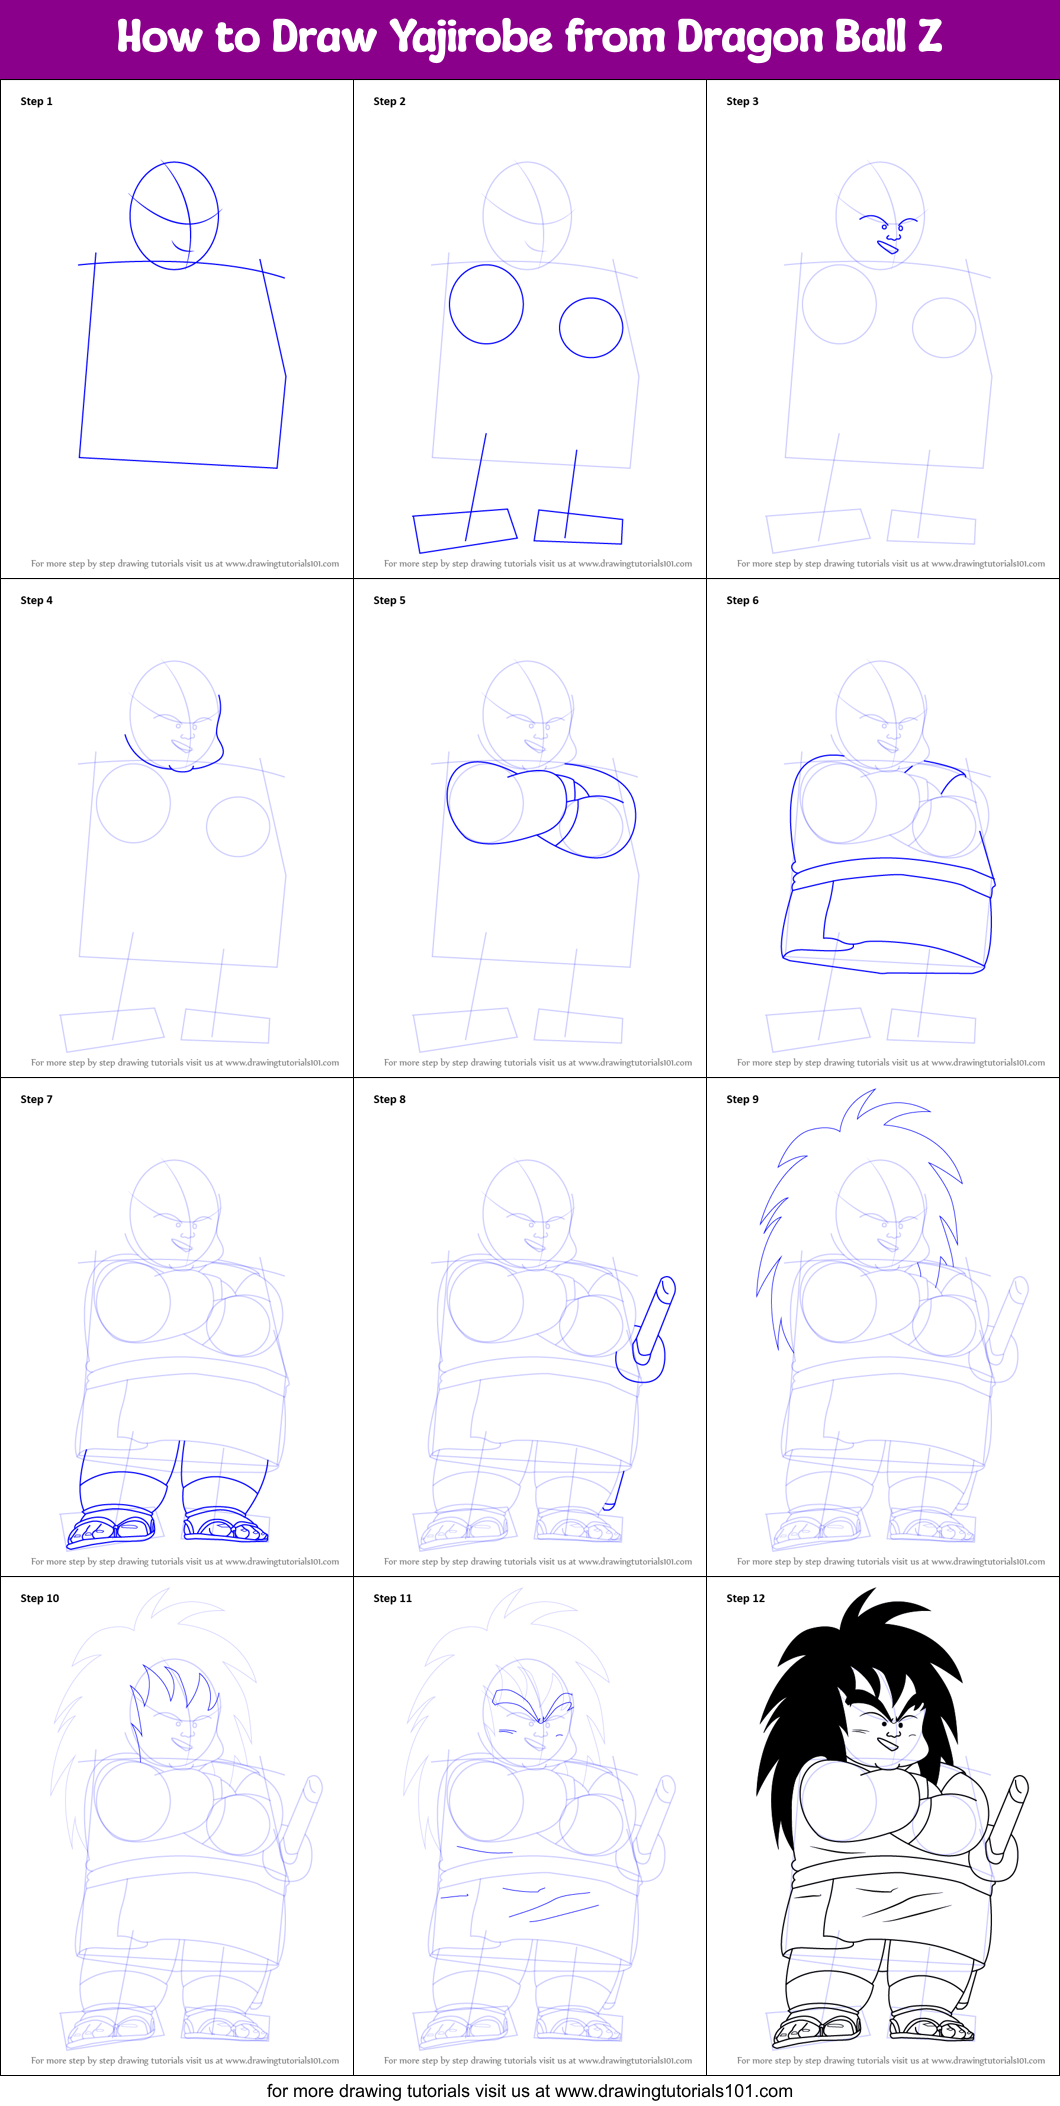 How To Draw Yajirobe From Dragon Ball Z Printable Step By Step Drawing Sheet Drawingtutorials101 Com